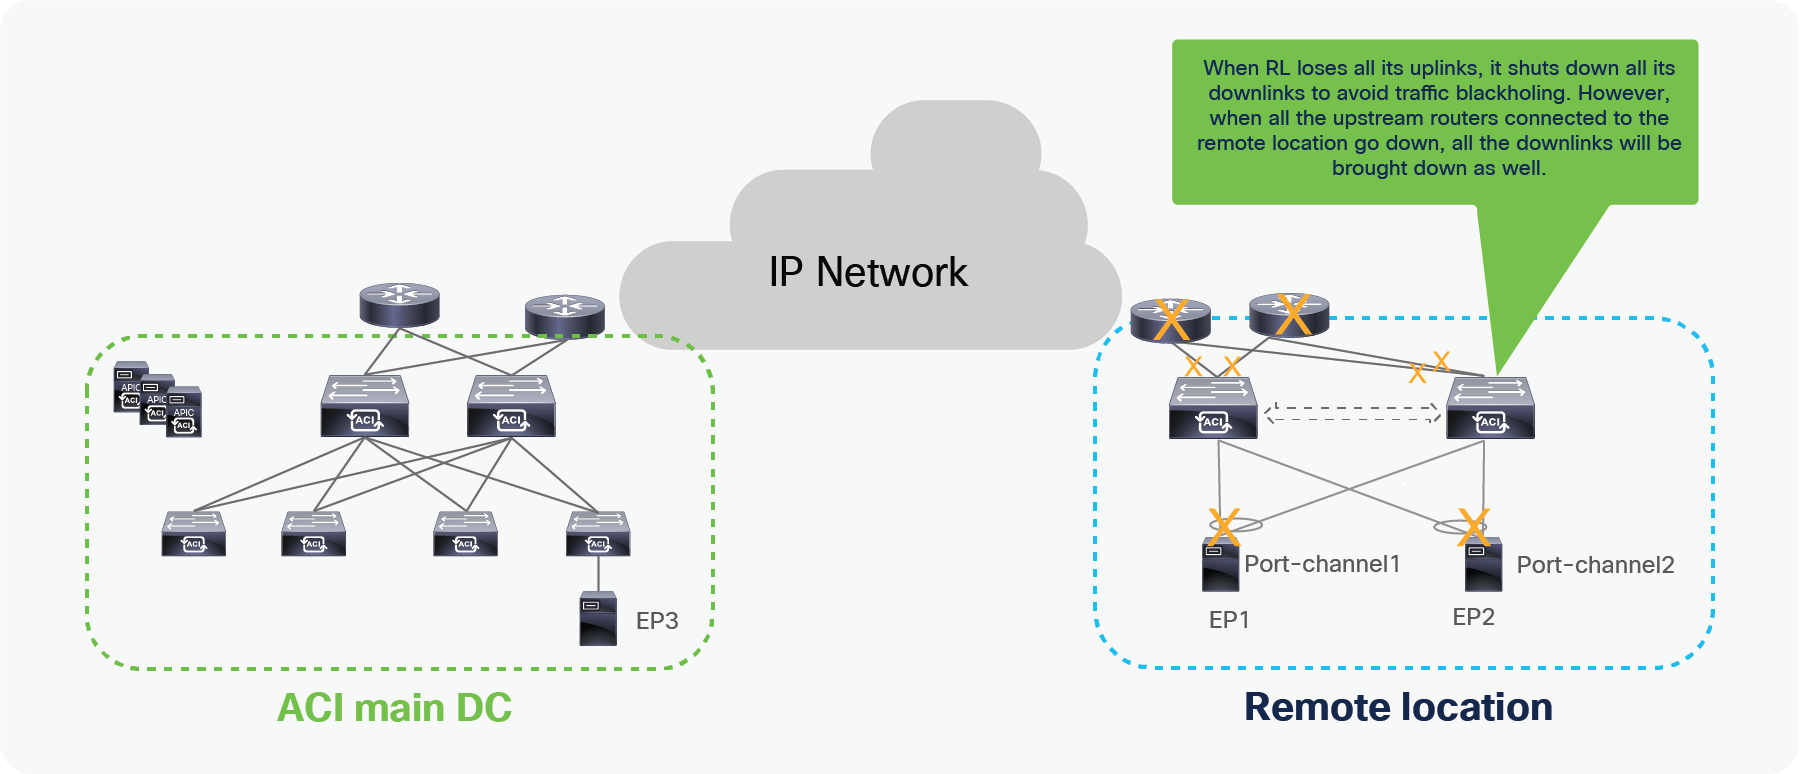 Failure scenario when RL loses all upstream routers, or all uplink connections